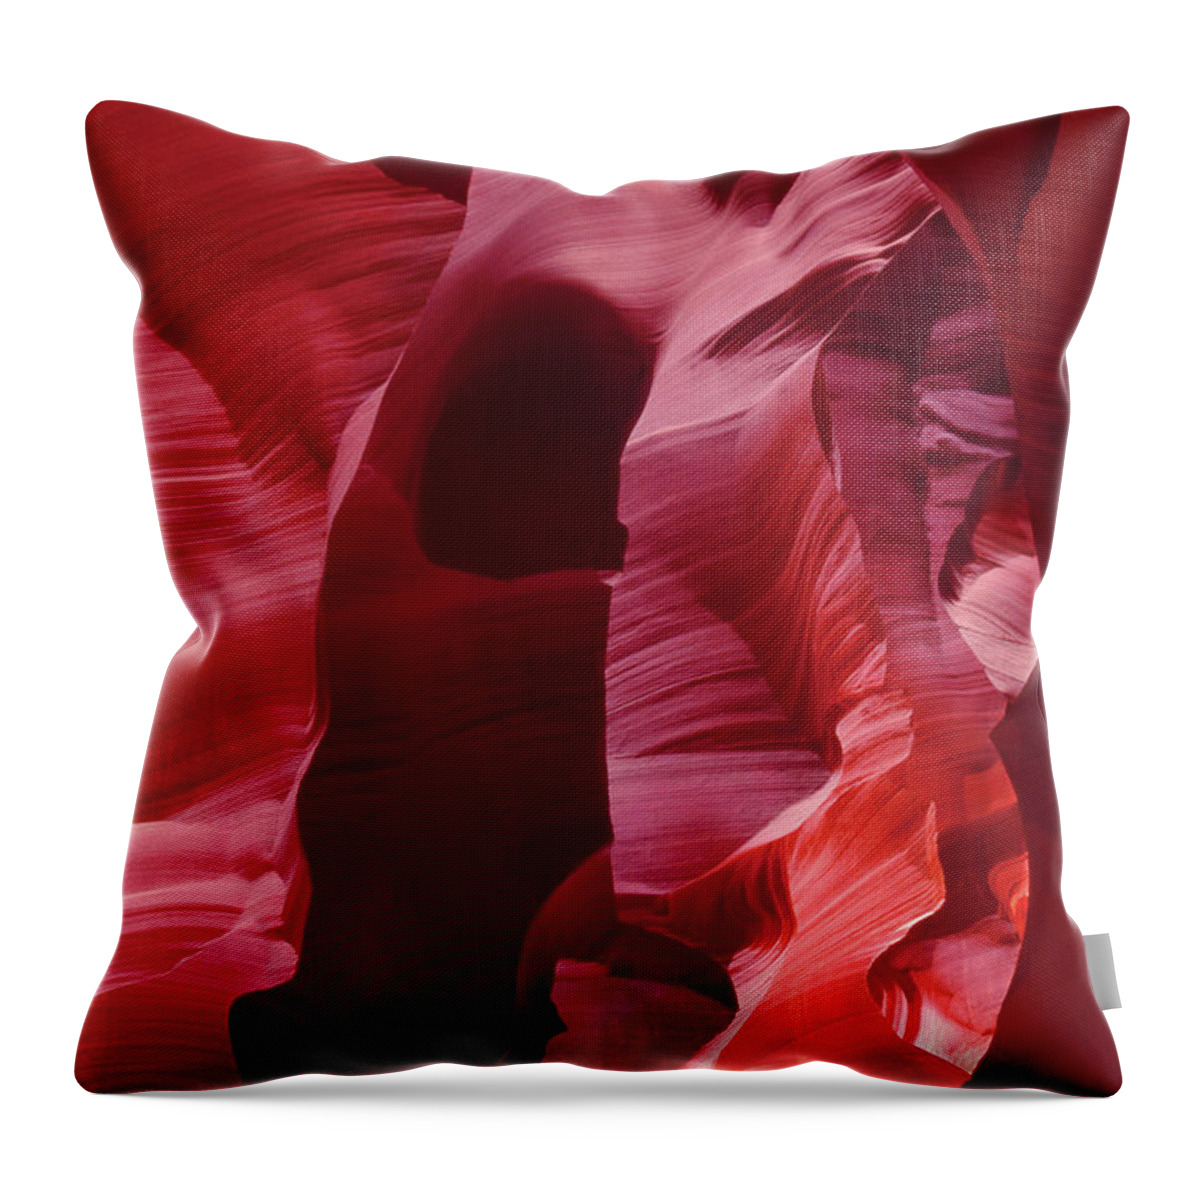 Dave Welling Throw Pillow featuring the photograph Abstract Sandstone Detail Lower Antelope Slot Canyon Arizona by Dave Welling